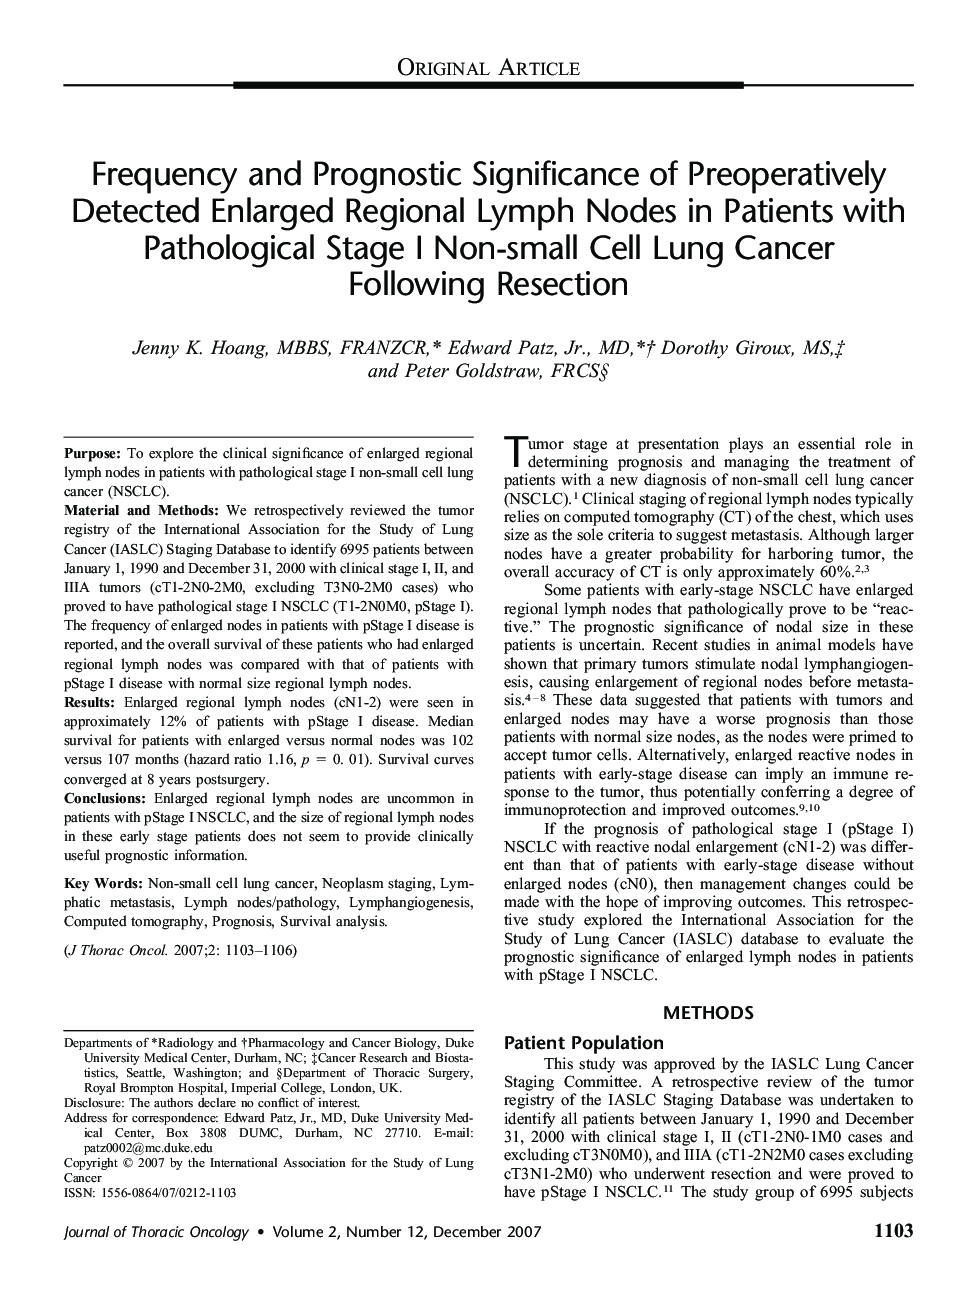 Frequency and Prognostic Significance of Preoperatively Detected Enlarged Regional Lymph Nodes in Patients with Pathological Stage I Non-small Cell Lung Cancer Following Resection 